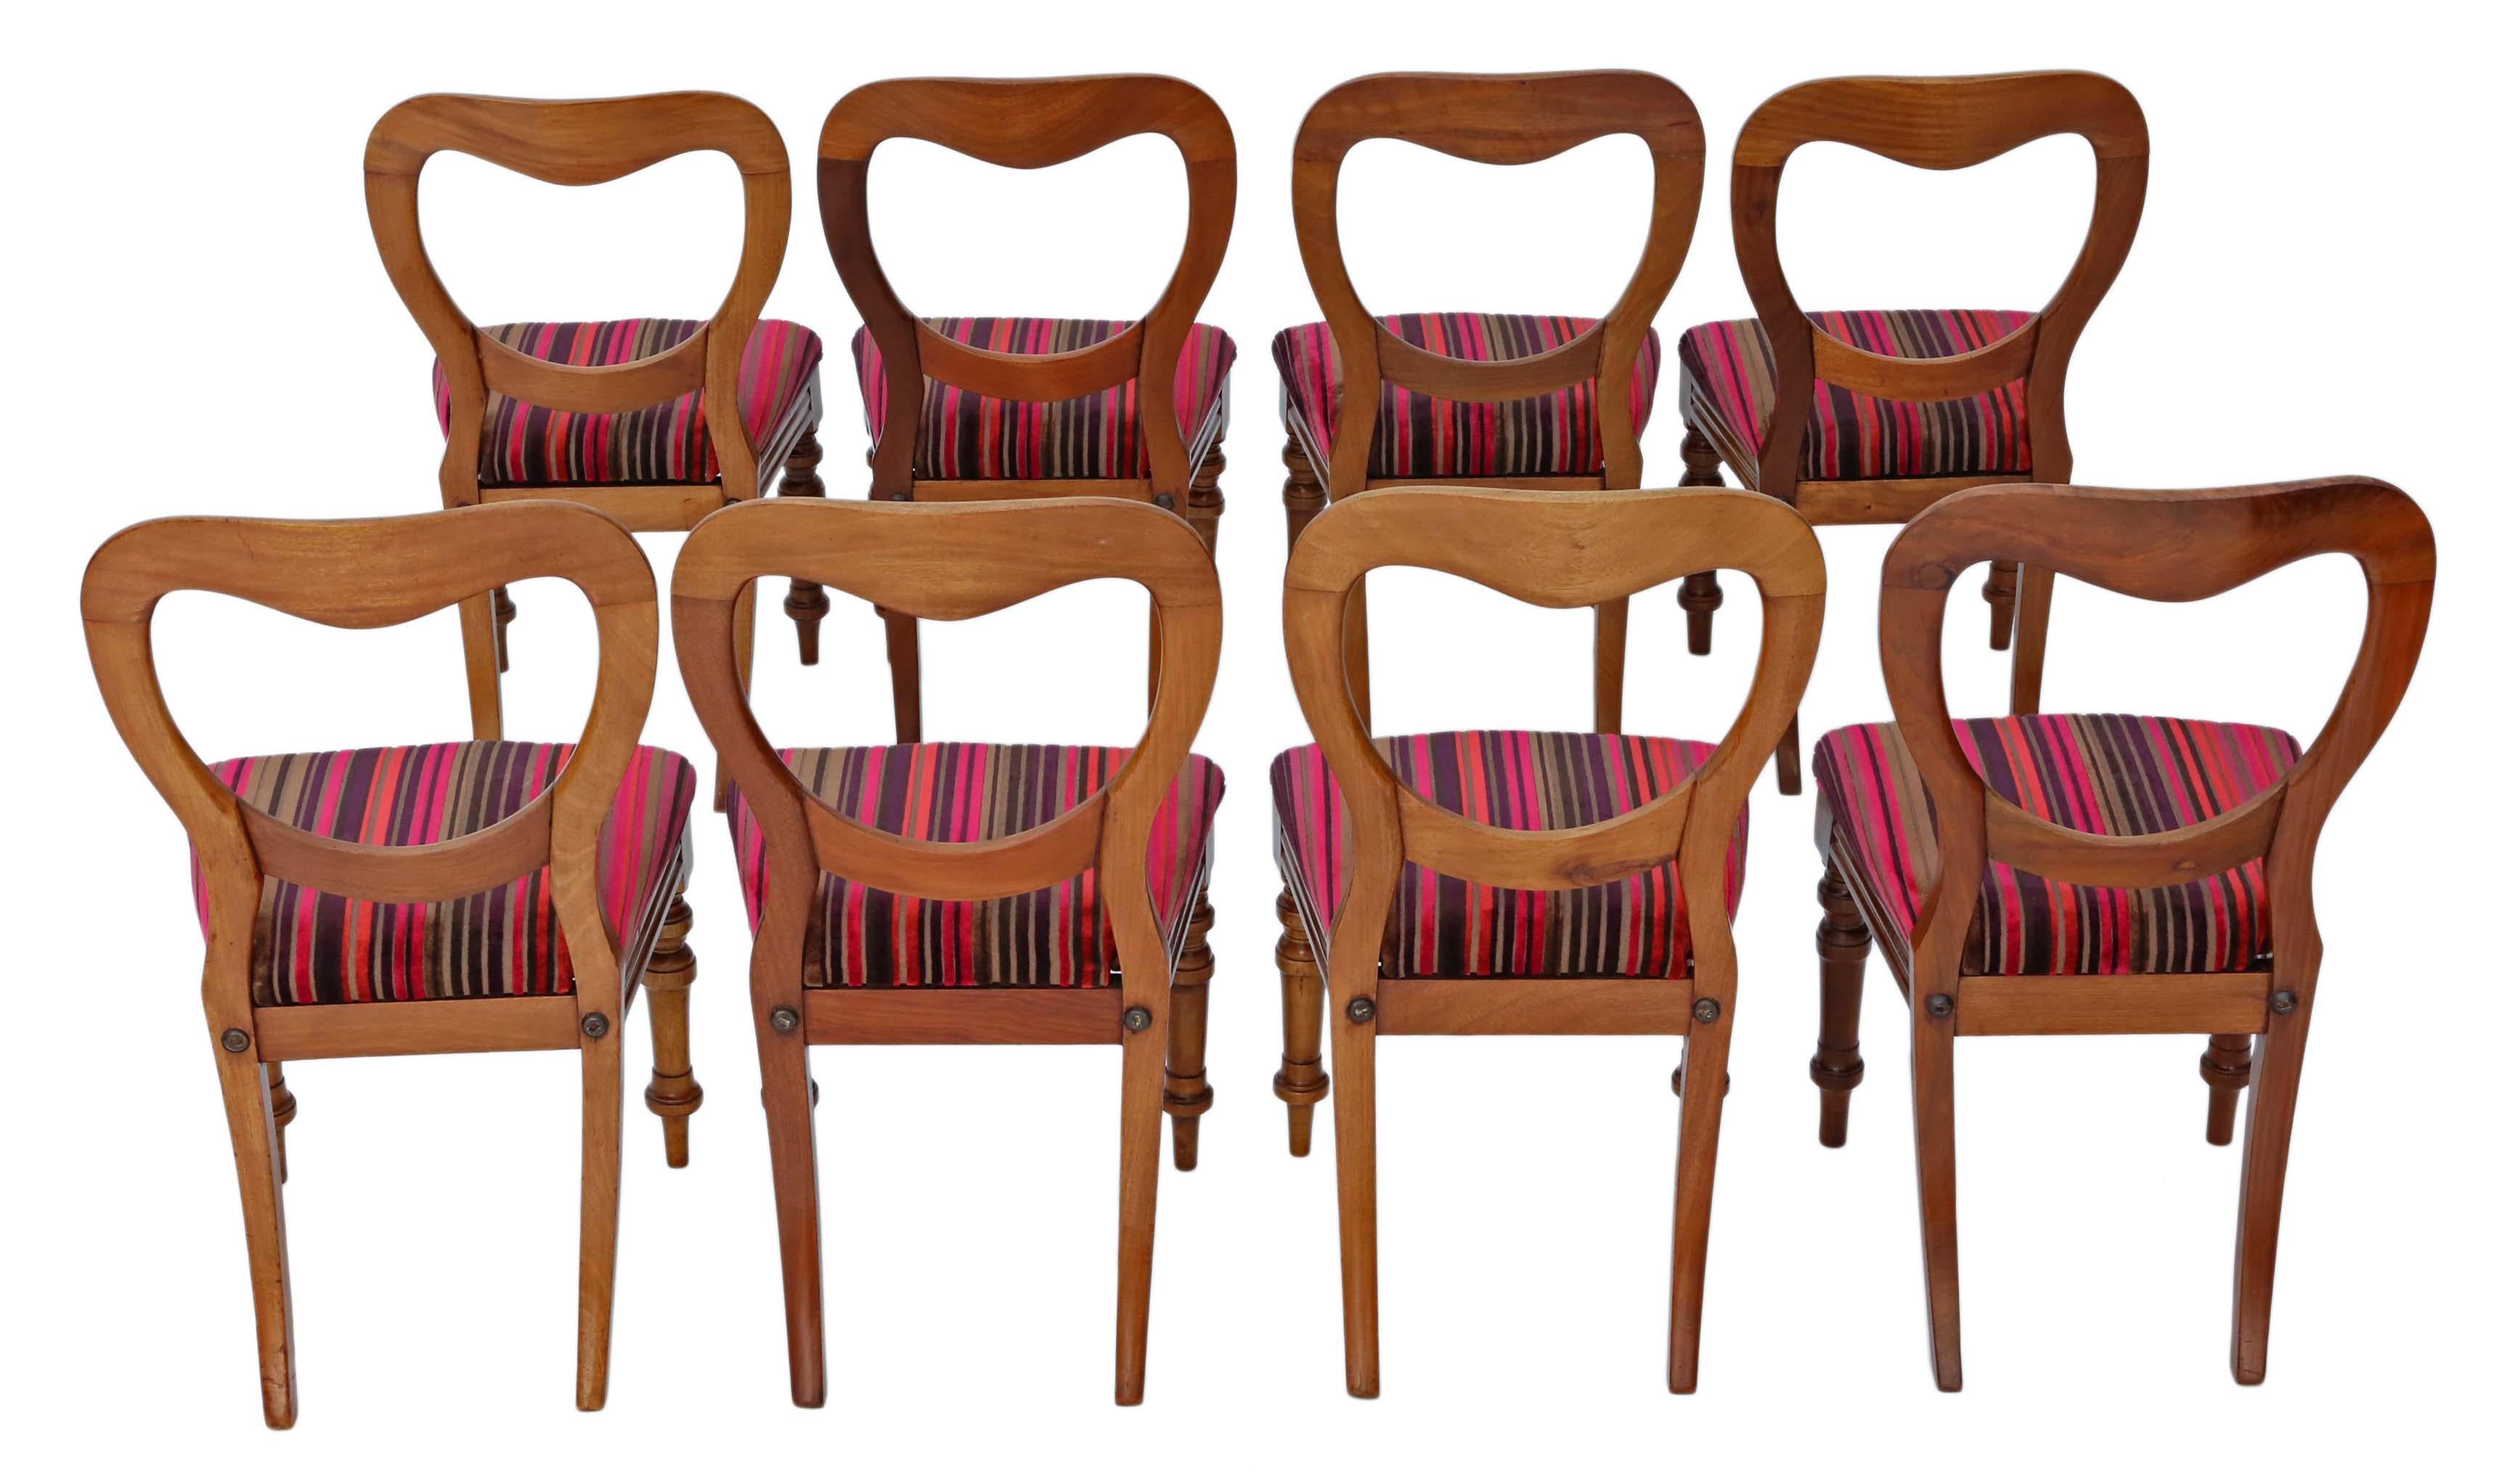 Set of 8 Victorian light mahogany balloon back dining chairs, circa 1890
Solid, heavy and strong with no loose joints. Full of age, character and charm. Very decorative chairs. No woodworm.
Recent heavy weight velour upholstery. Not new, but no